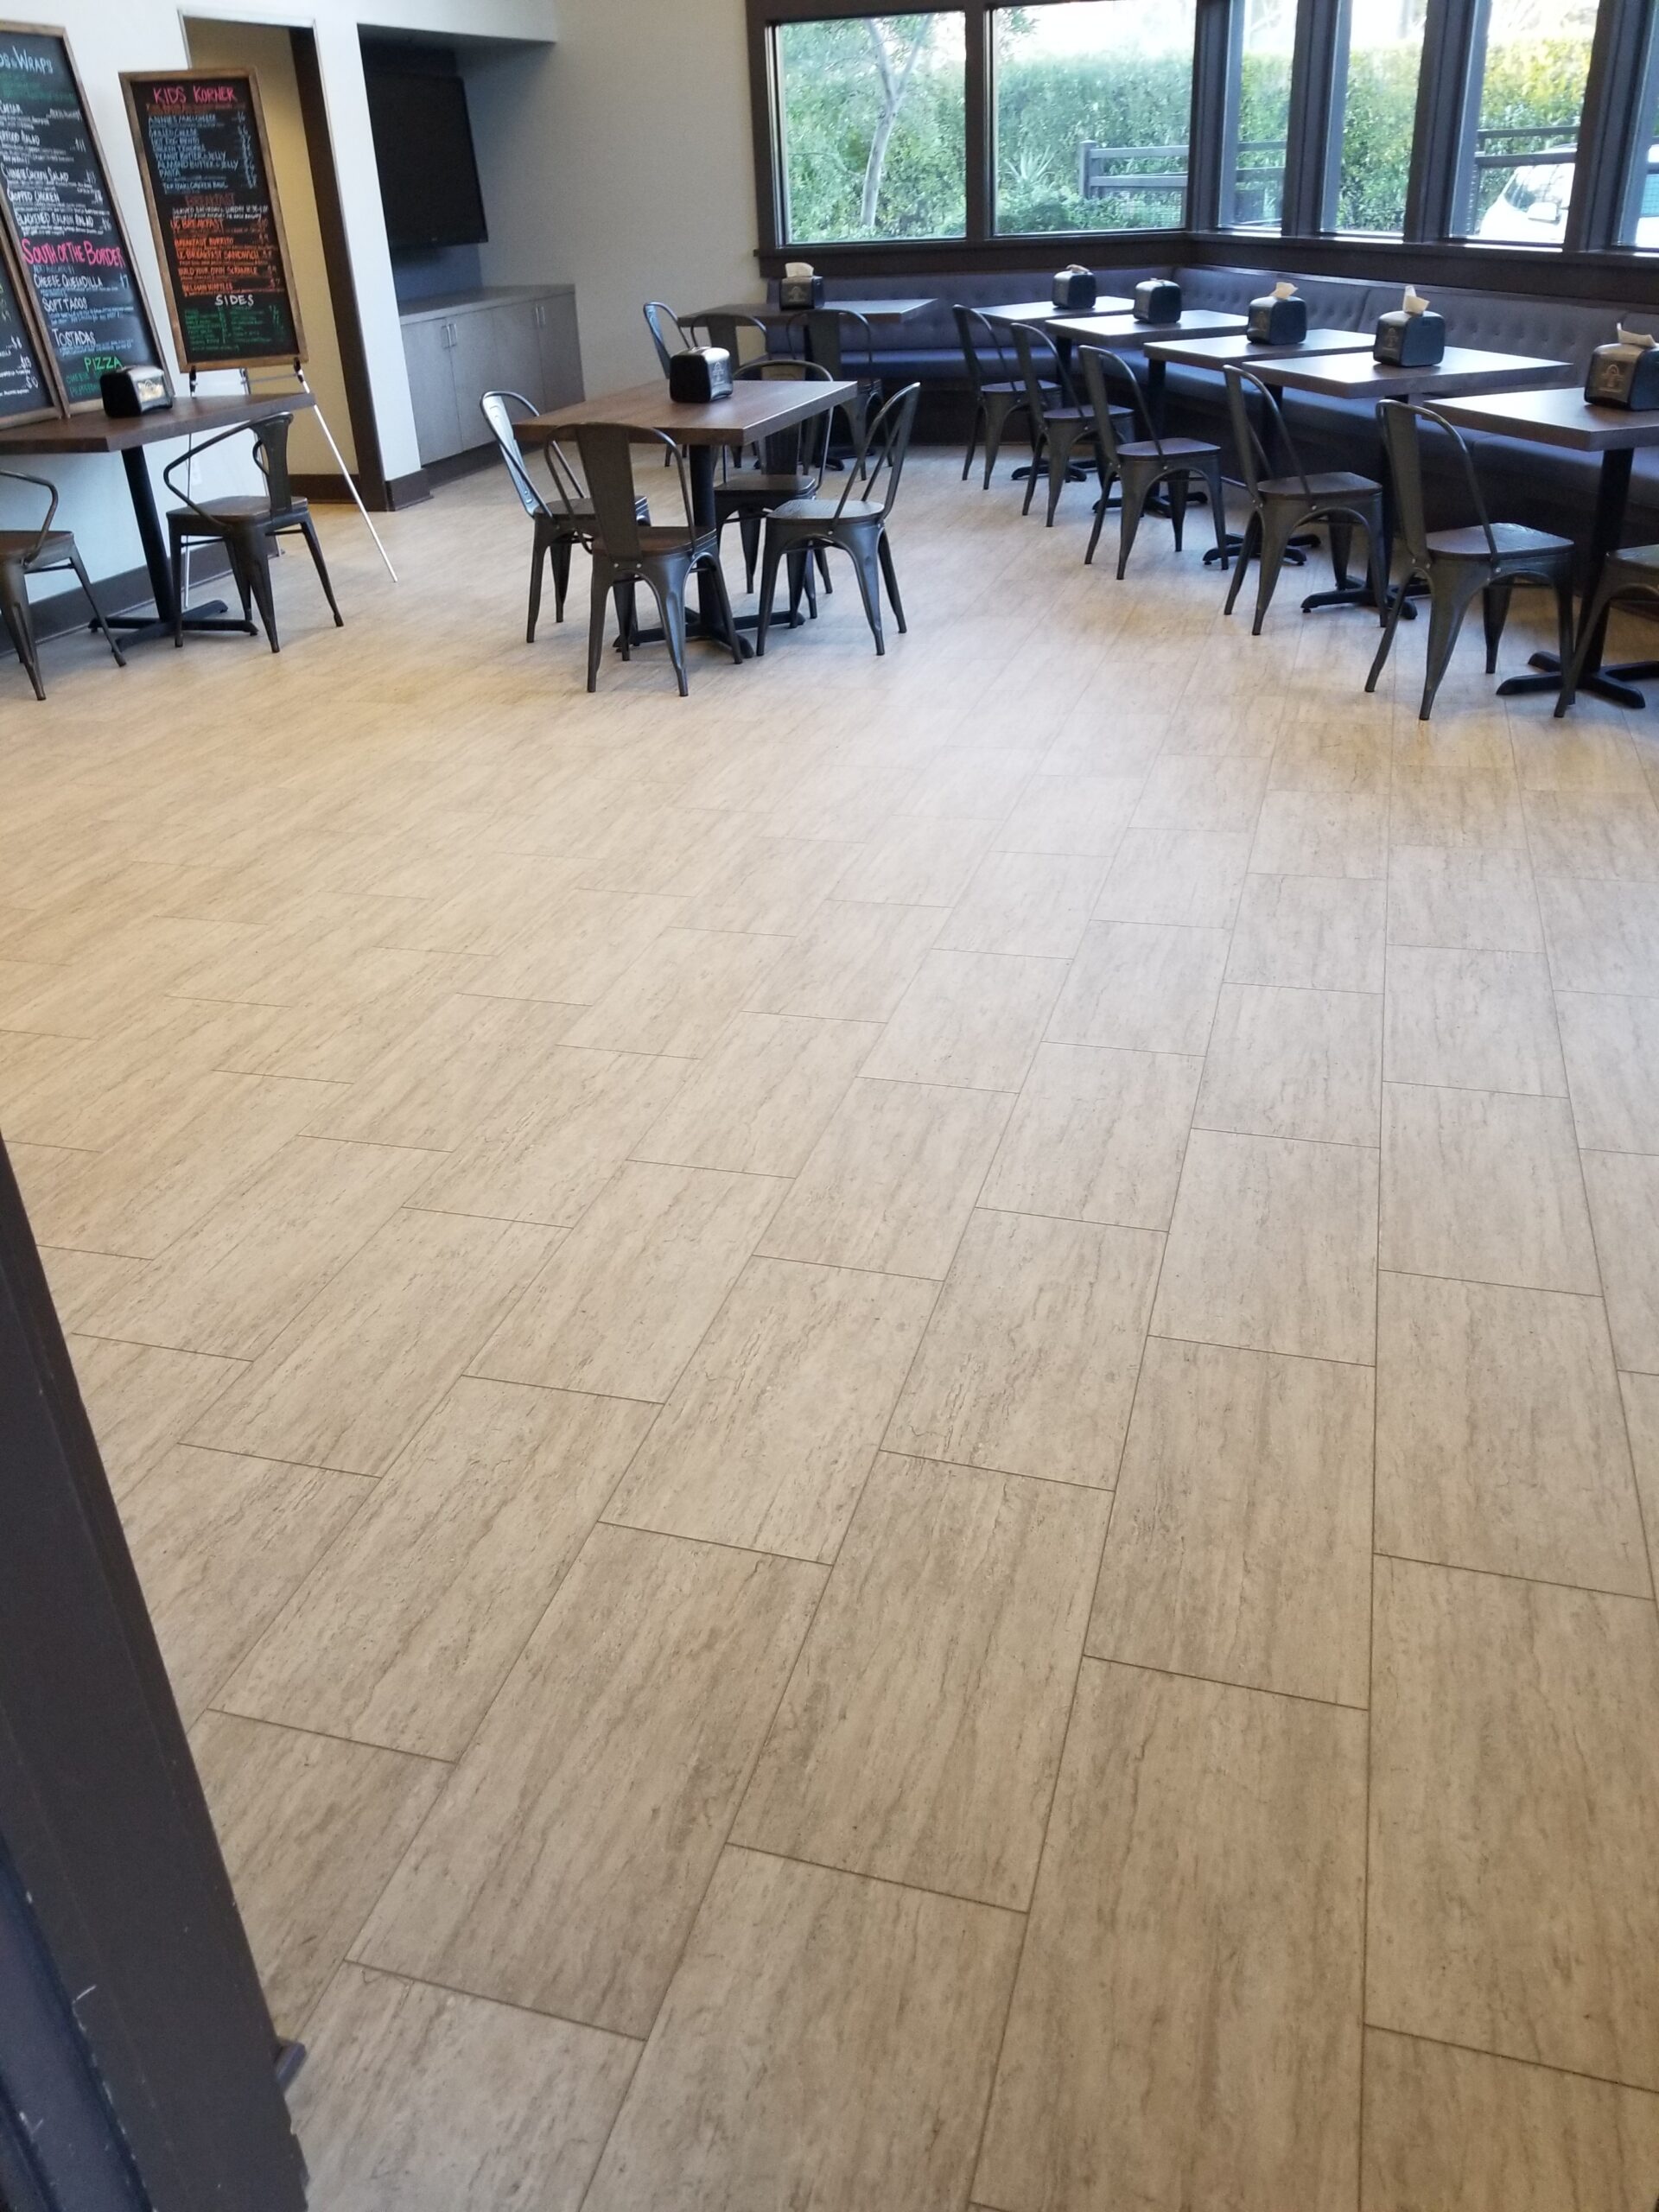 LVT installed to 850 square feet cafe in  Palo Alto private club. Now club members can enjoy lunches and snacks in pleasant-looking environment.